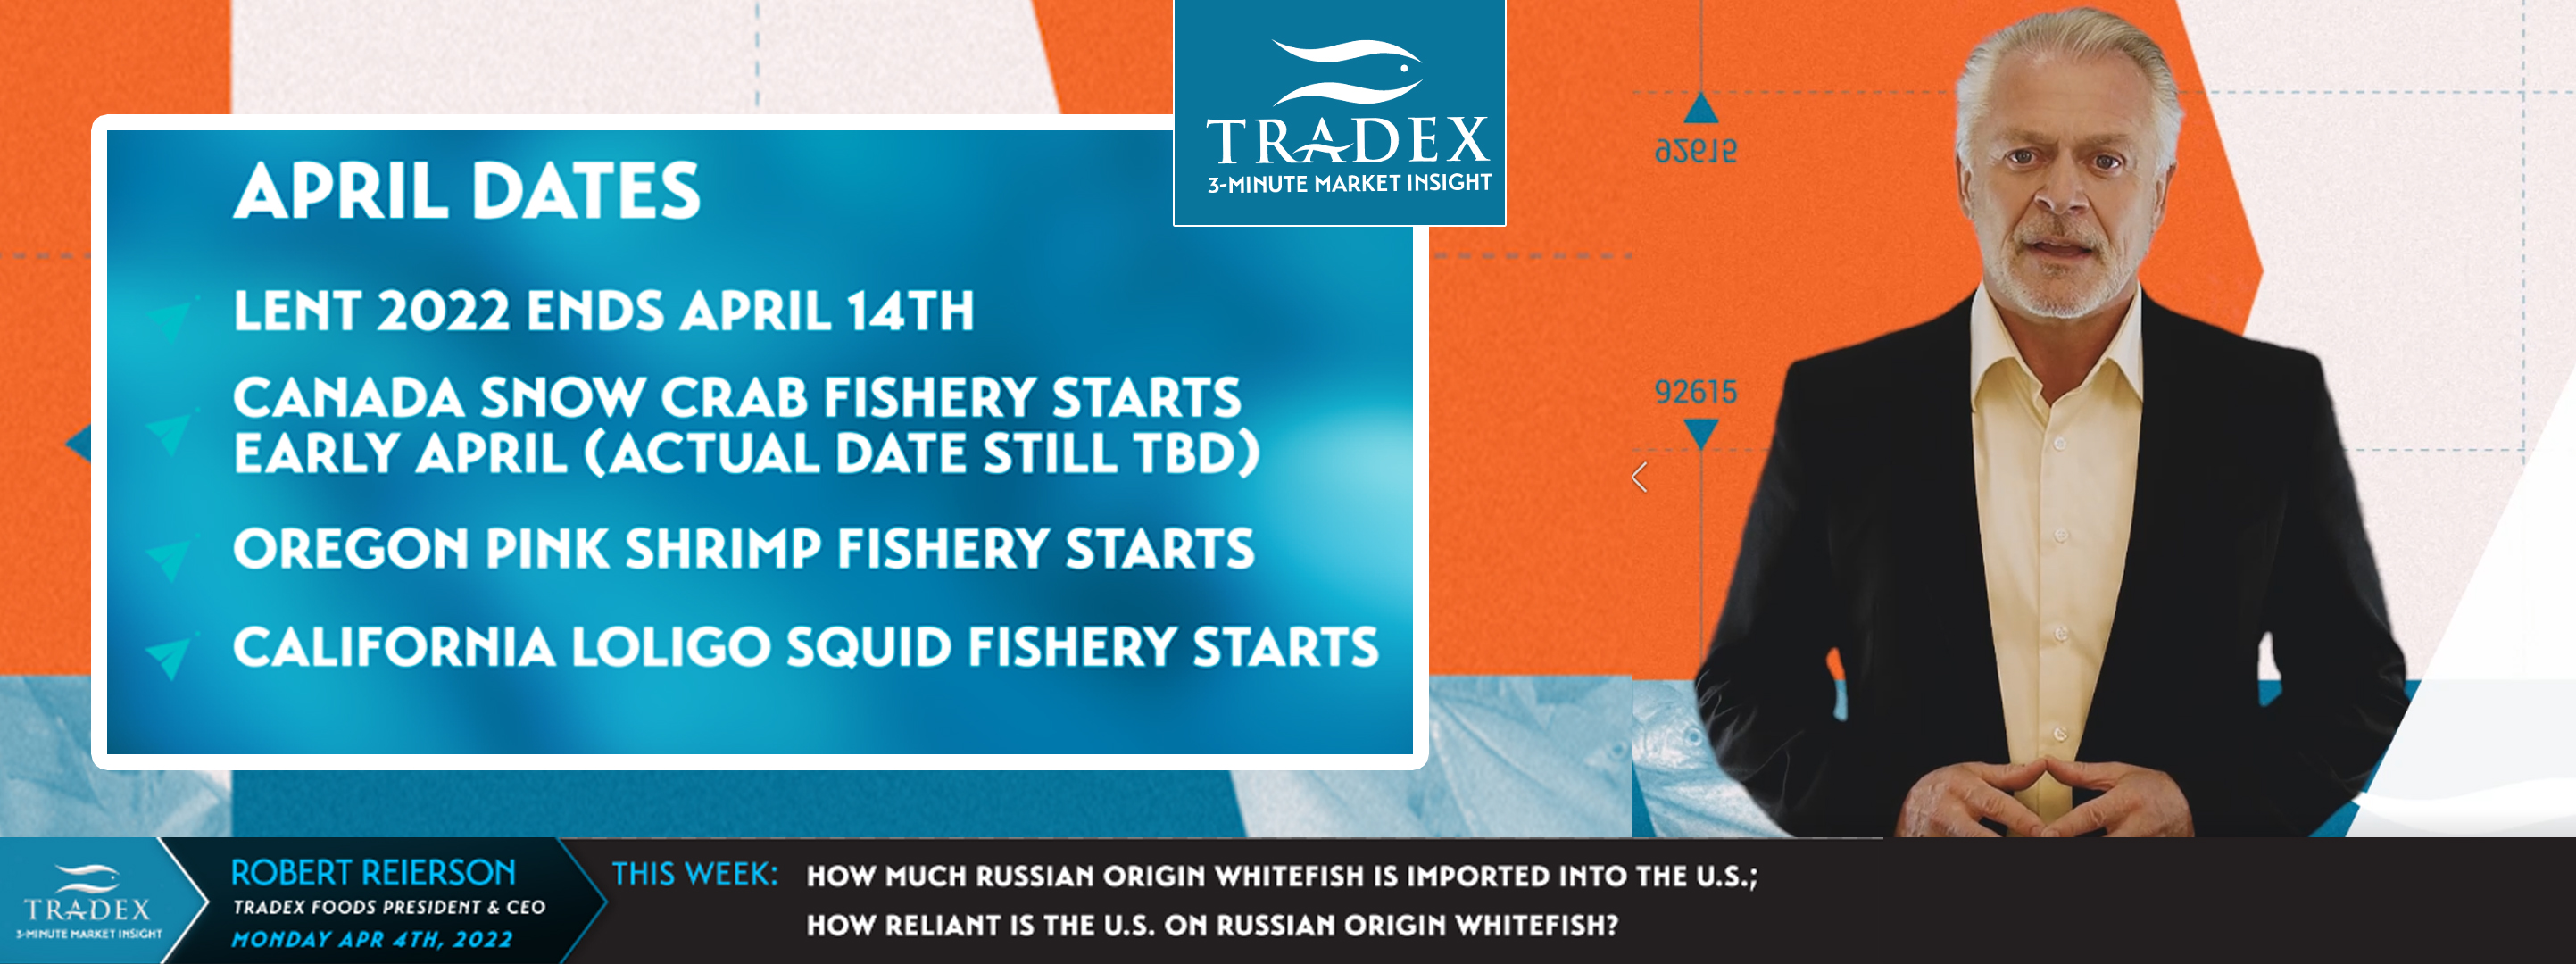 RUSSIAN WHITEFISH IMPORTS